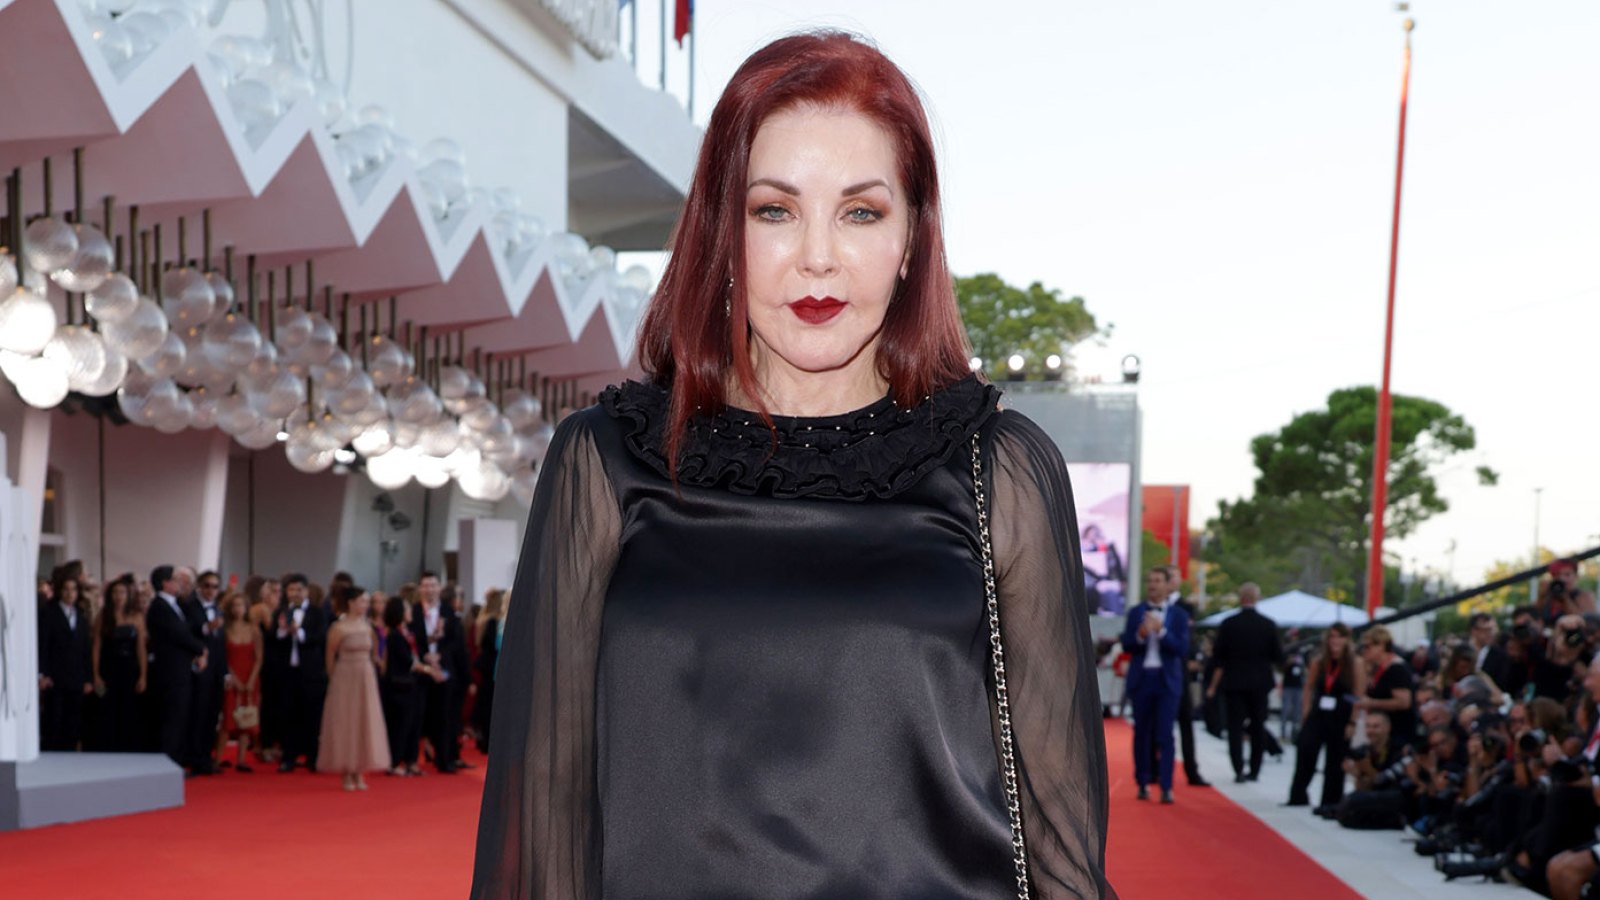 Priscilla Presley Tears Up at Venice Film Festival: The Untold Story Behind Her Emotional Reaction to 'Priscilla' Movie